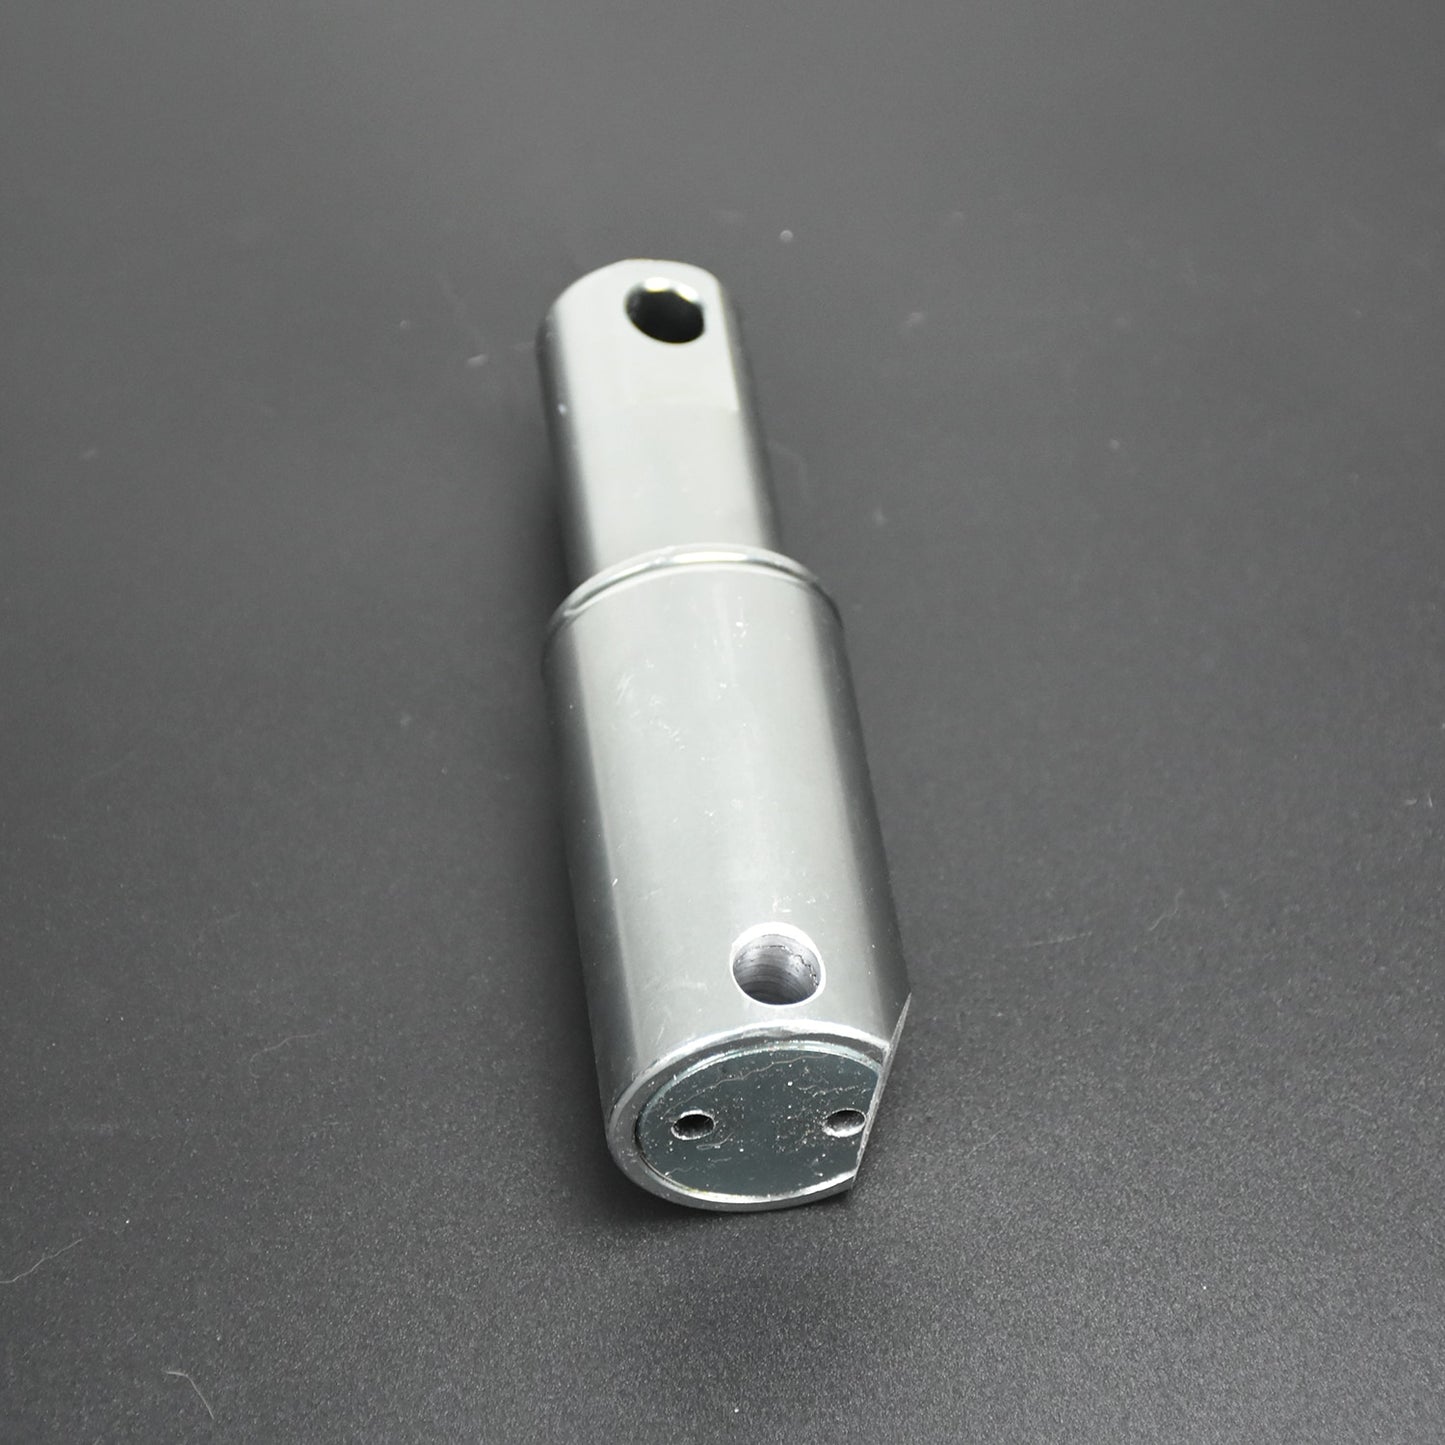 Generic Cylindrical Hydraulic shock rear suspension for S3 Boyueda electric scooter Accessory Parts